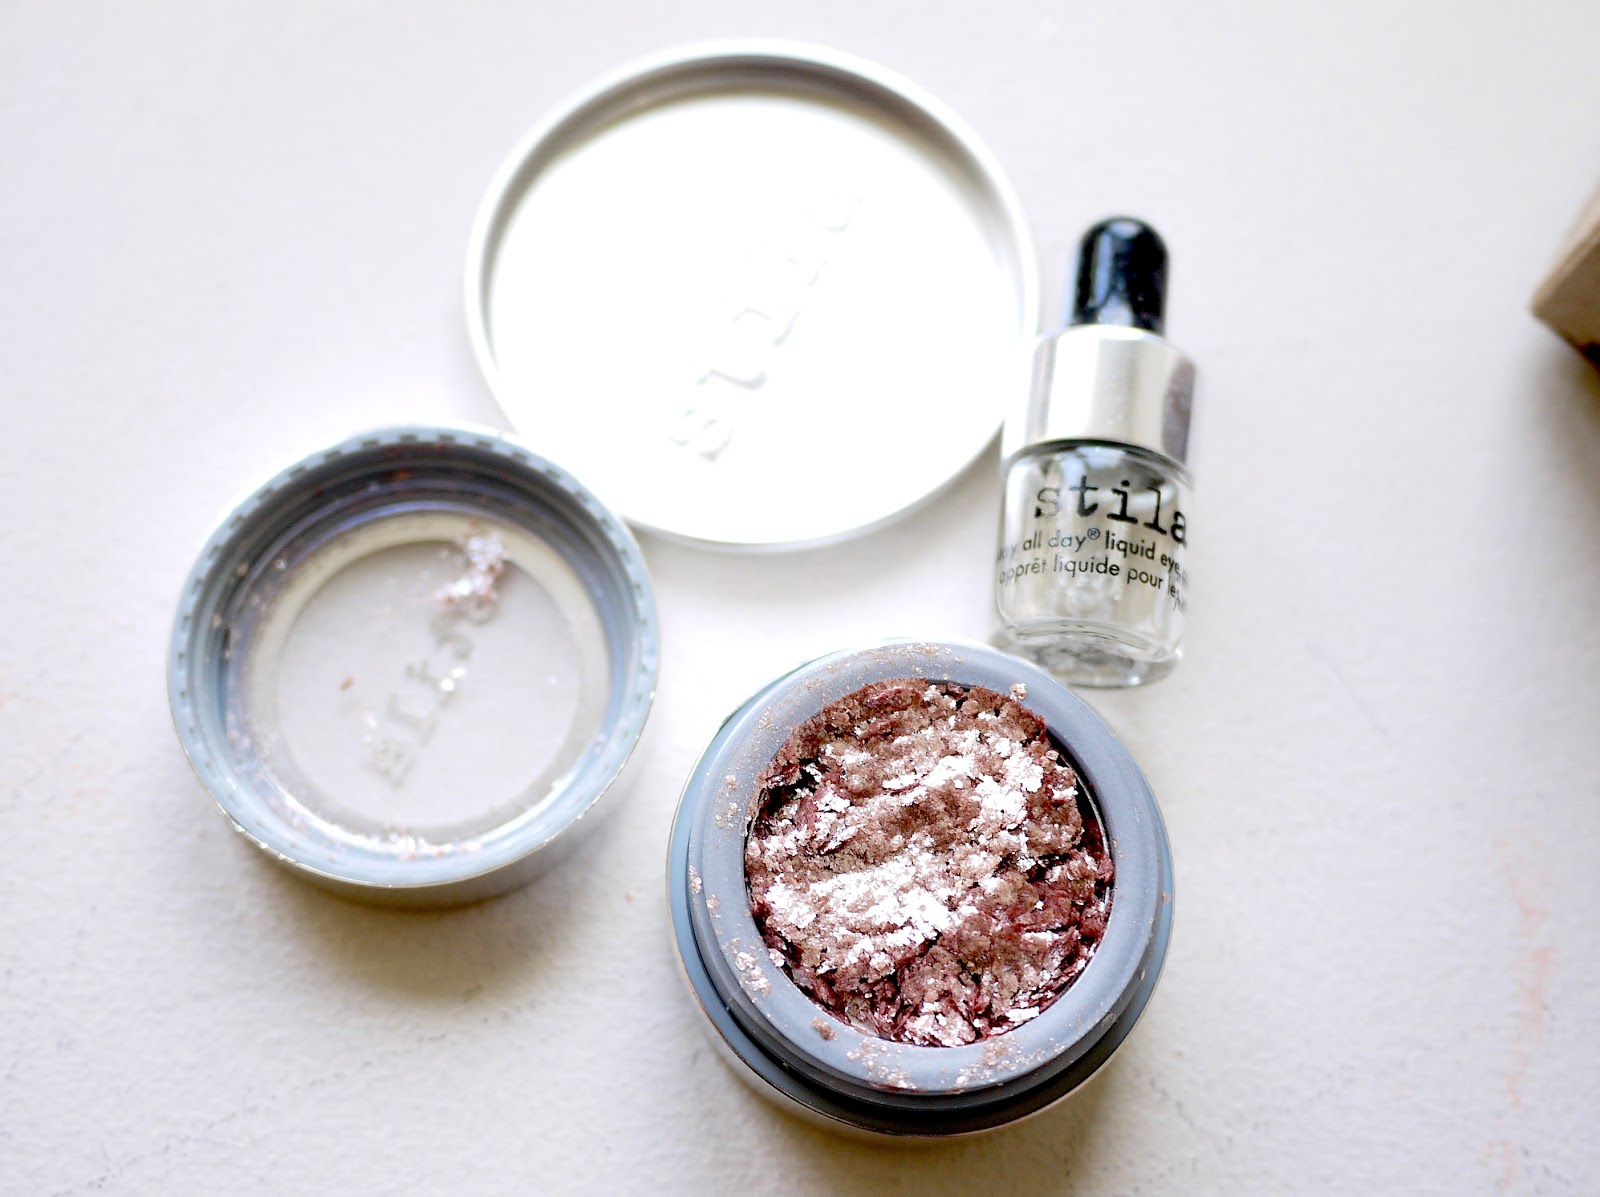 Stila Magnificent Metals Foil Finish Eye Shadow Metallic Dusty Rose swatch review